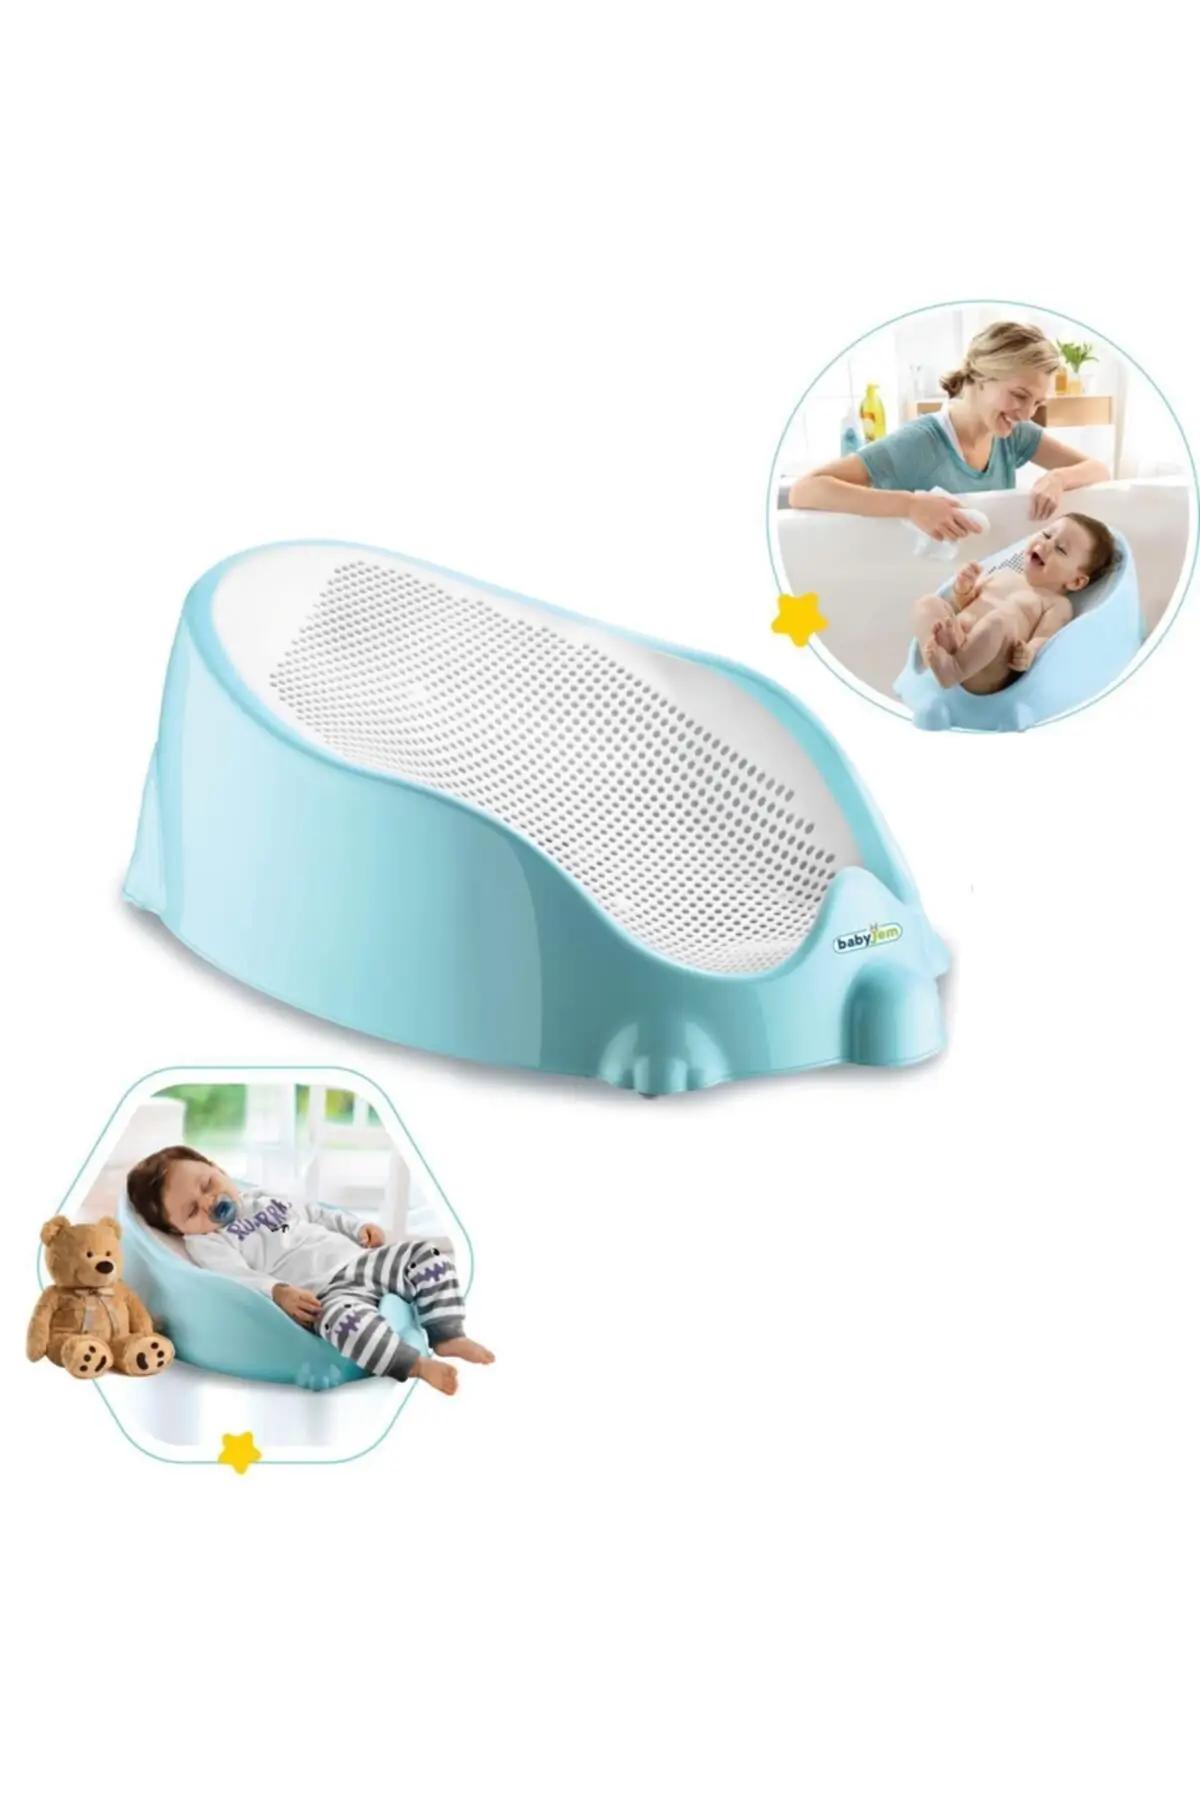 Babyjm Newborn Baby Bathtub Support Chair Infant Anti-Slip Soft Comfort Baby Bath Items Accessories For Baby For And kids